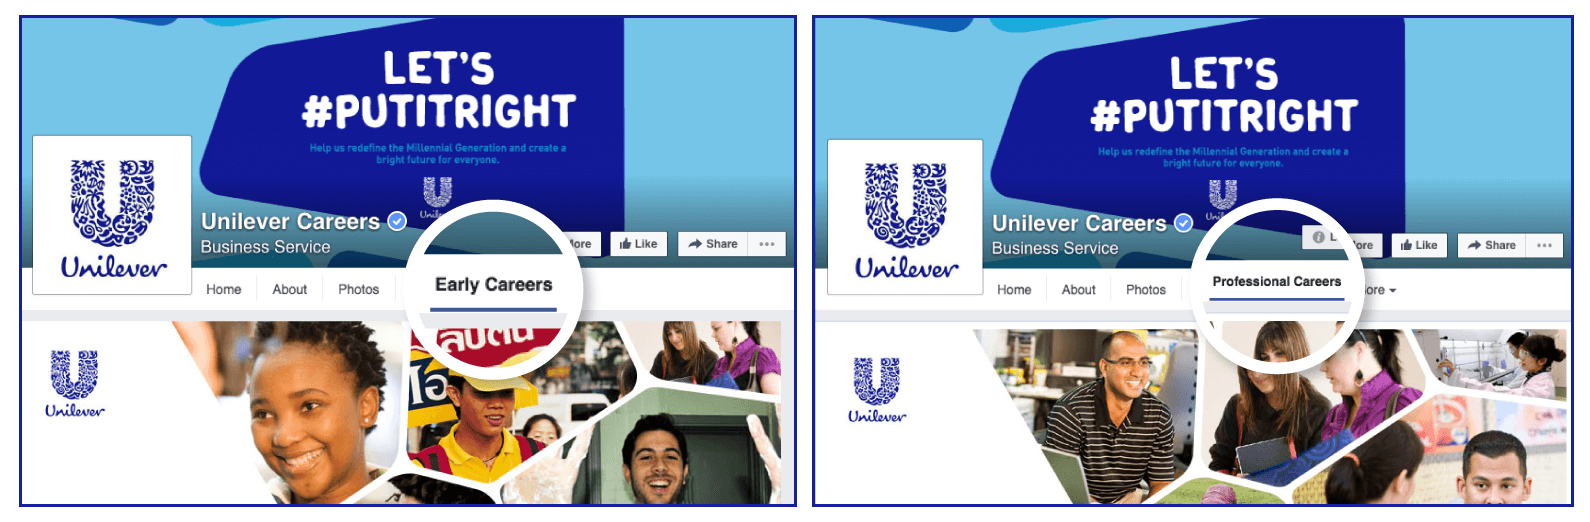 careers page 101 | Unilever Facebook careers page